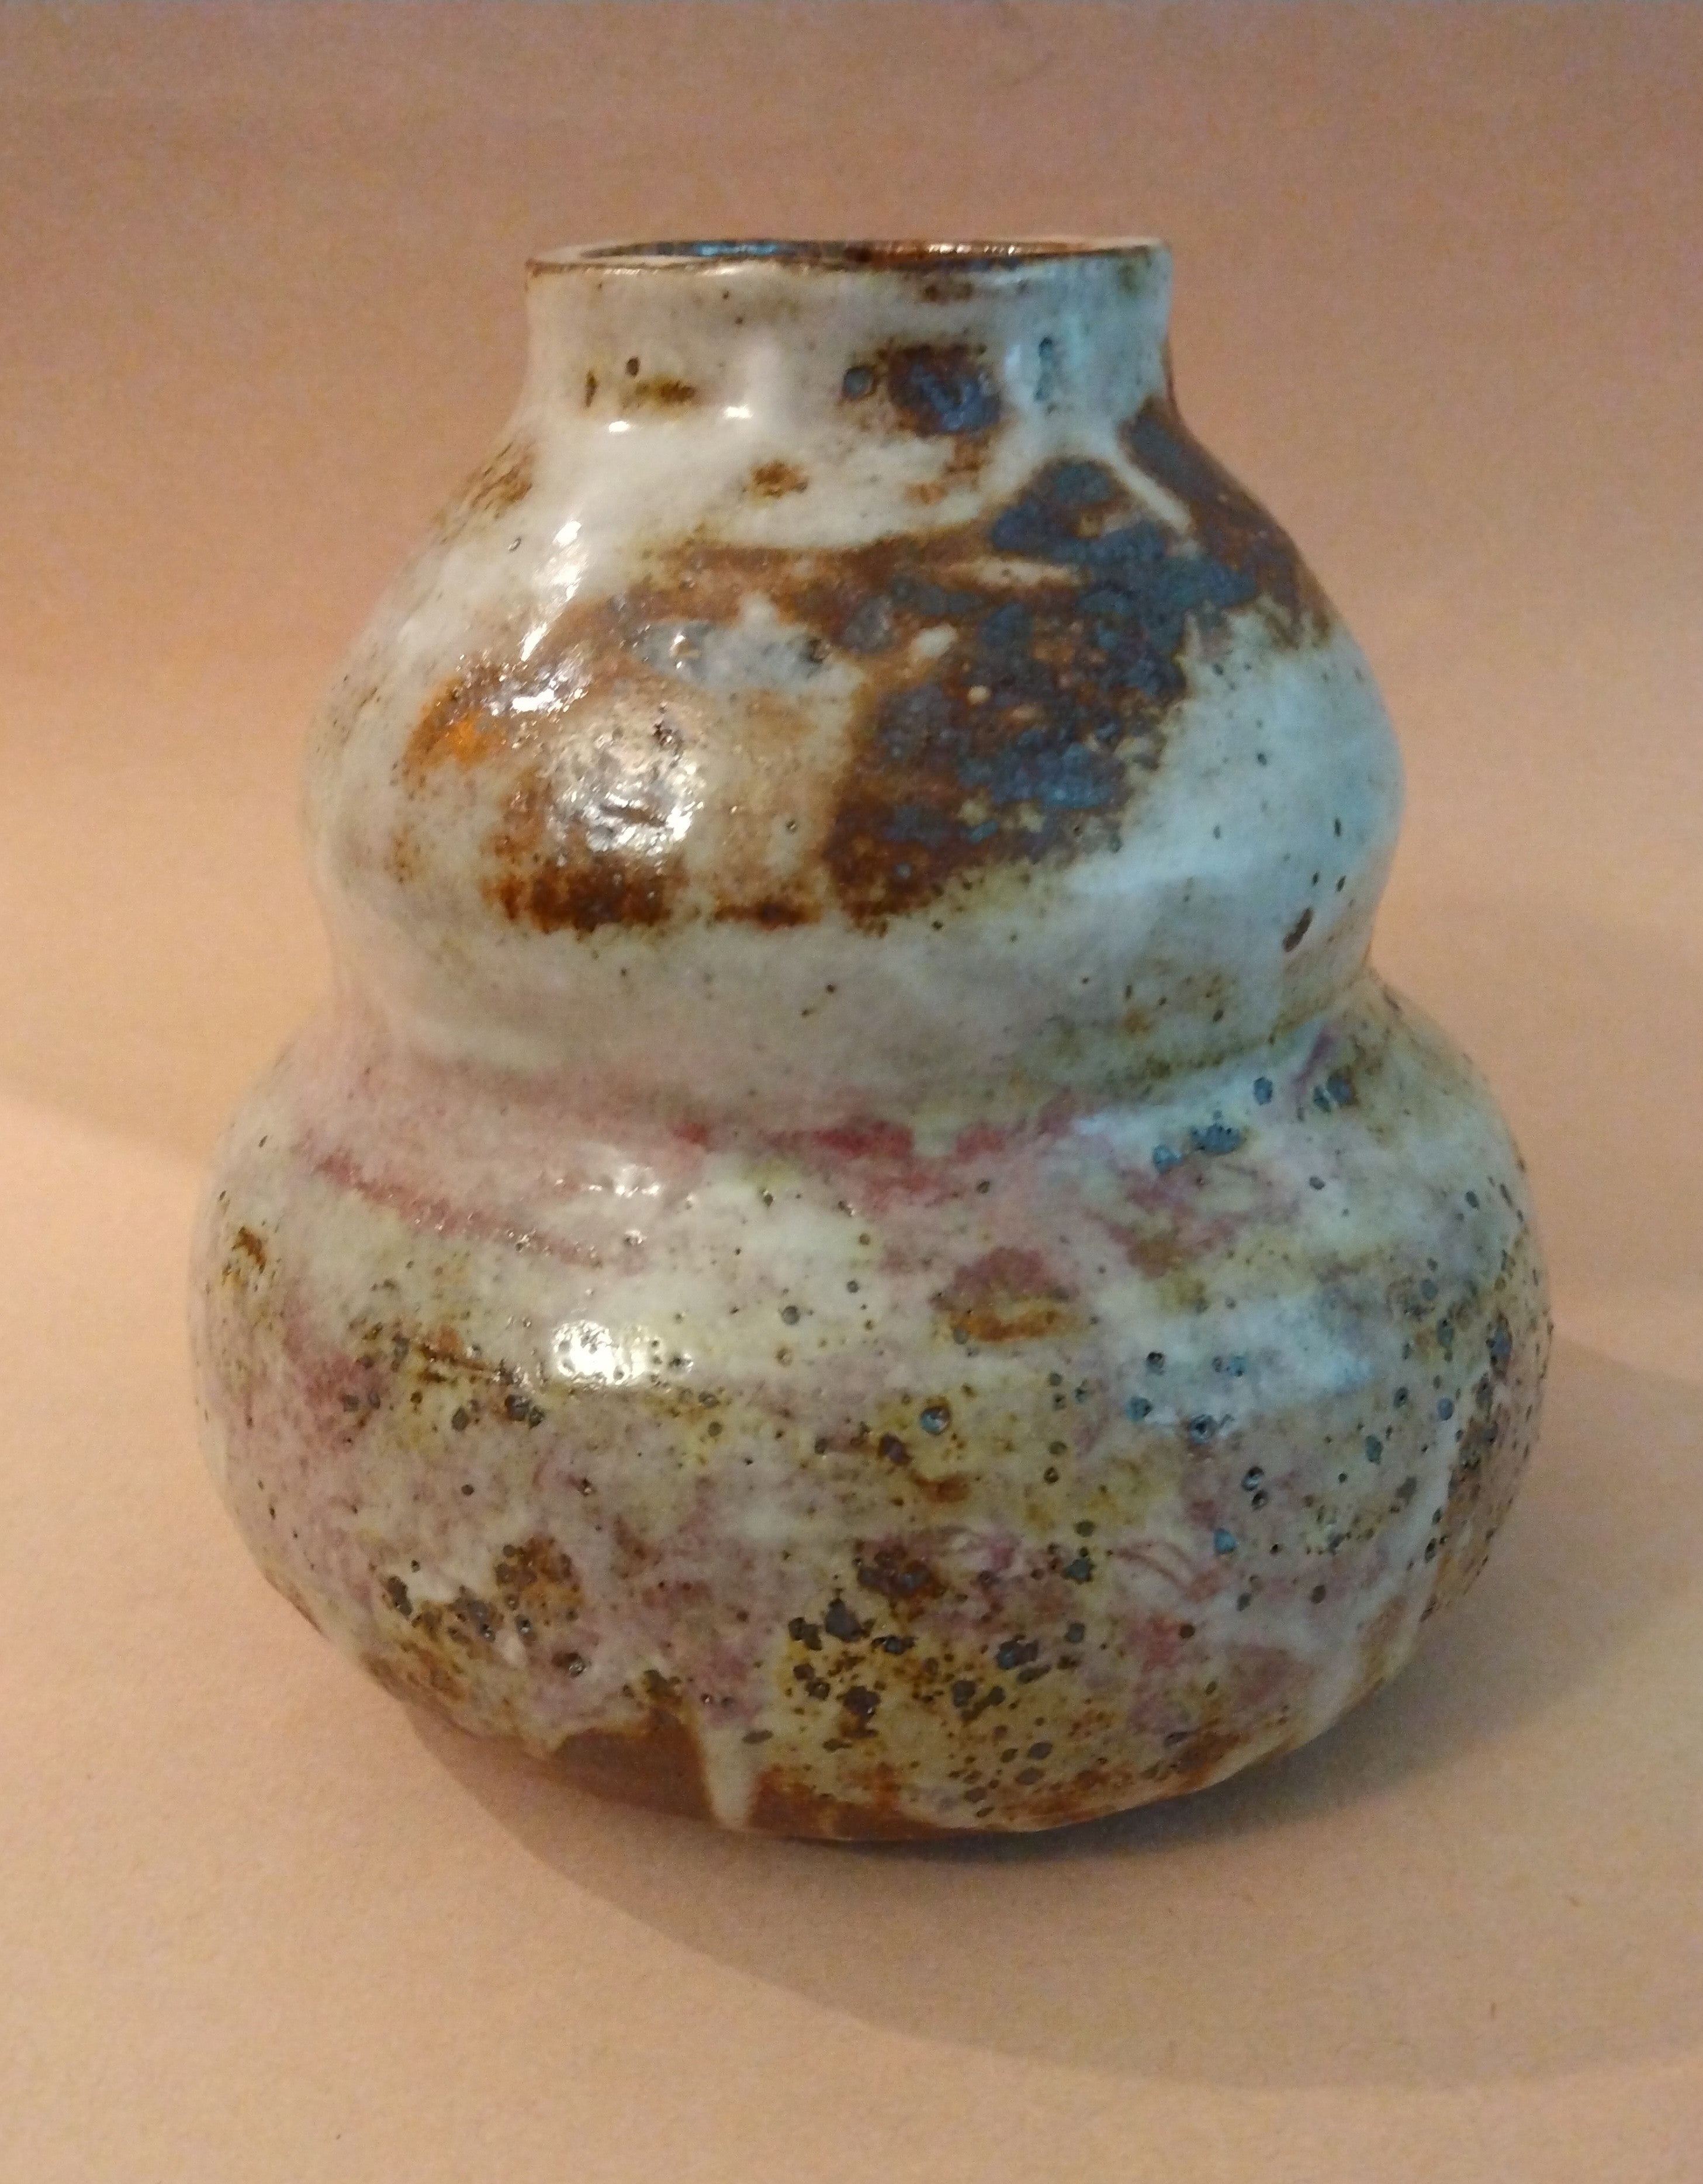 20% donated to Maui Wildfire Relief - Gourd-shaped Vase by Sachiko Furuya